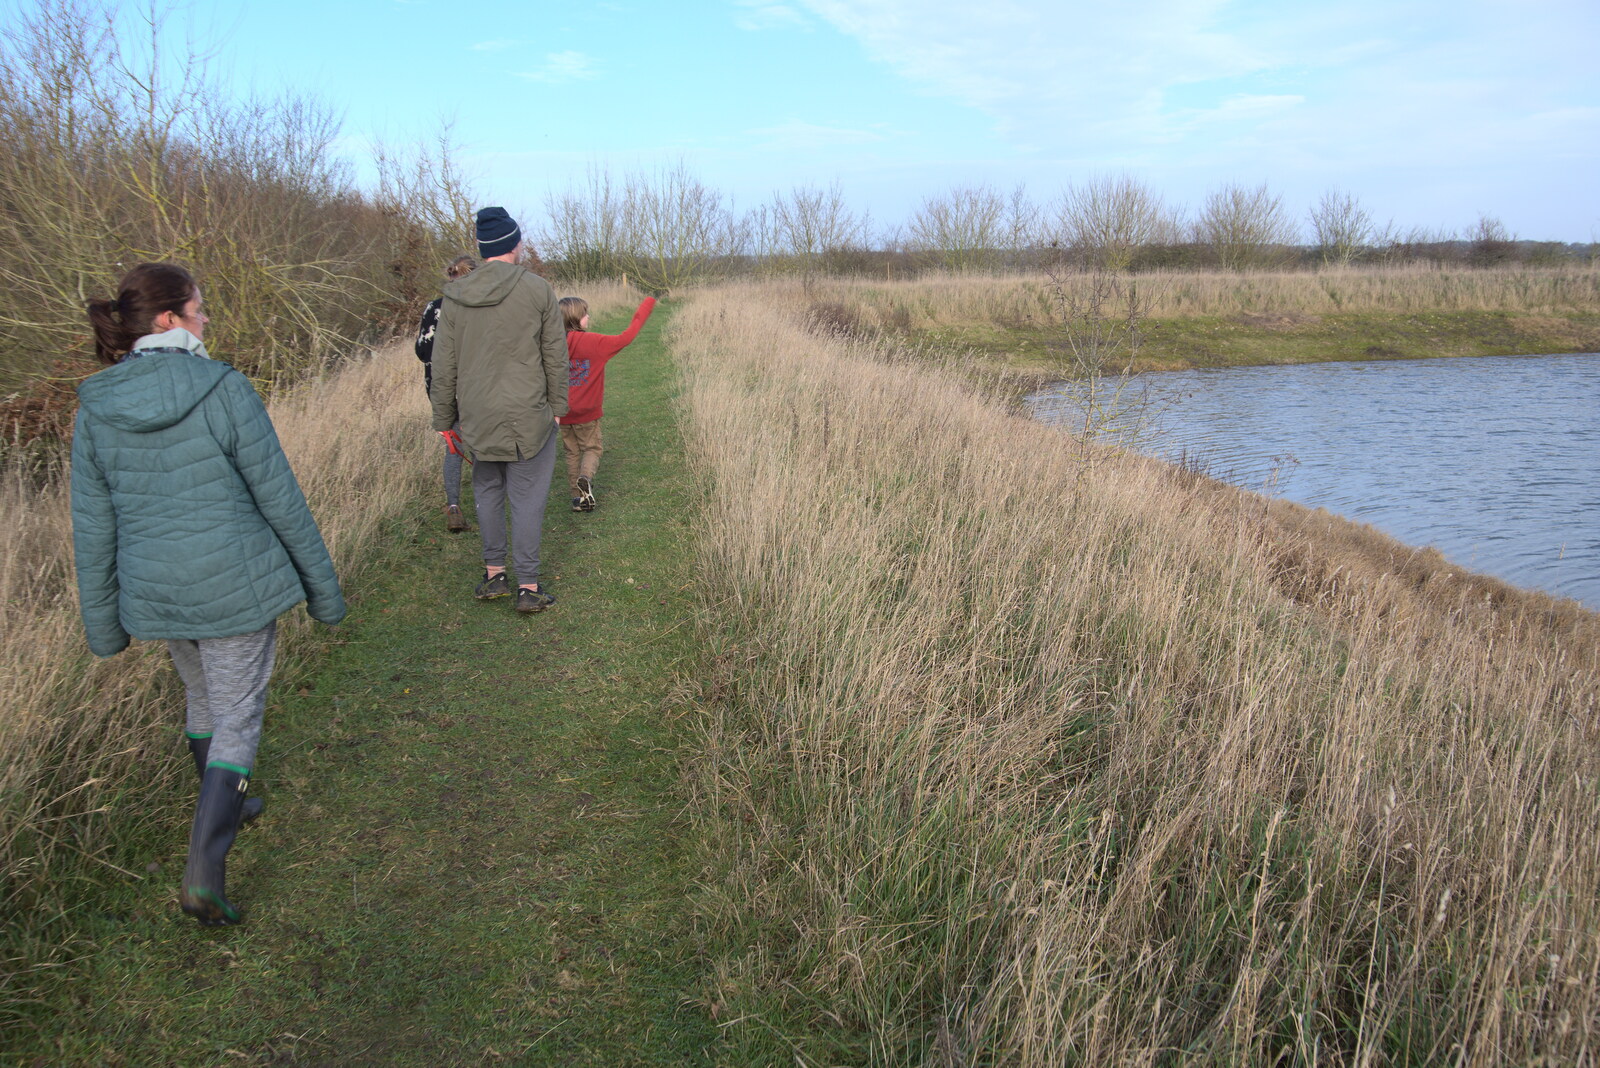 We walk around the resevoir from New Year's Day, Brome, Suffolk - 1st January 2022